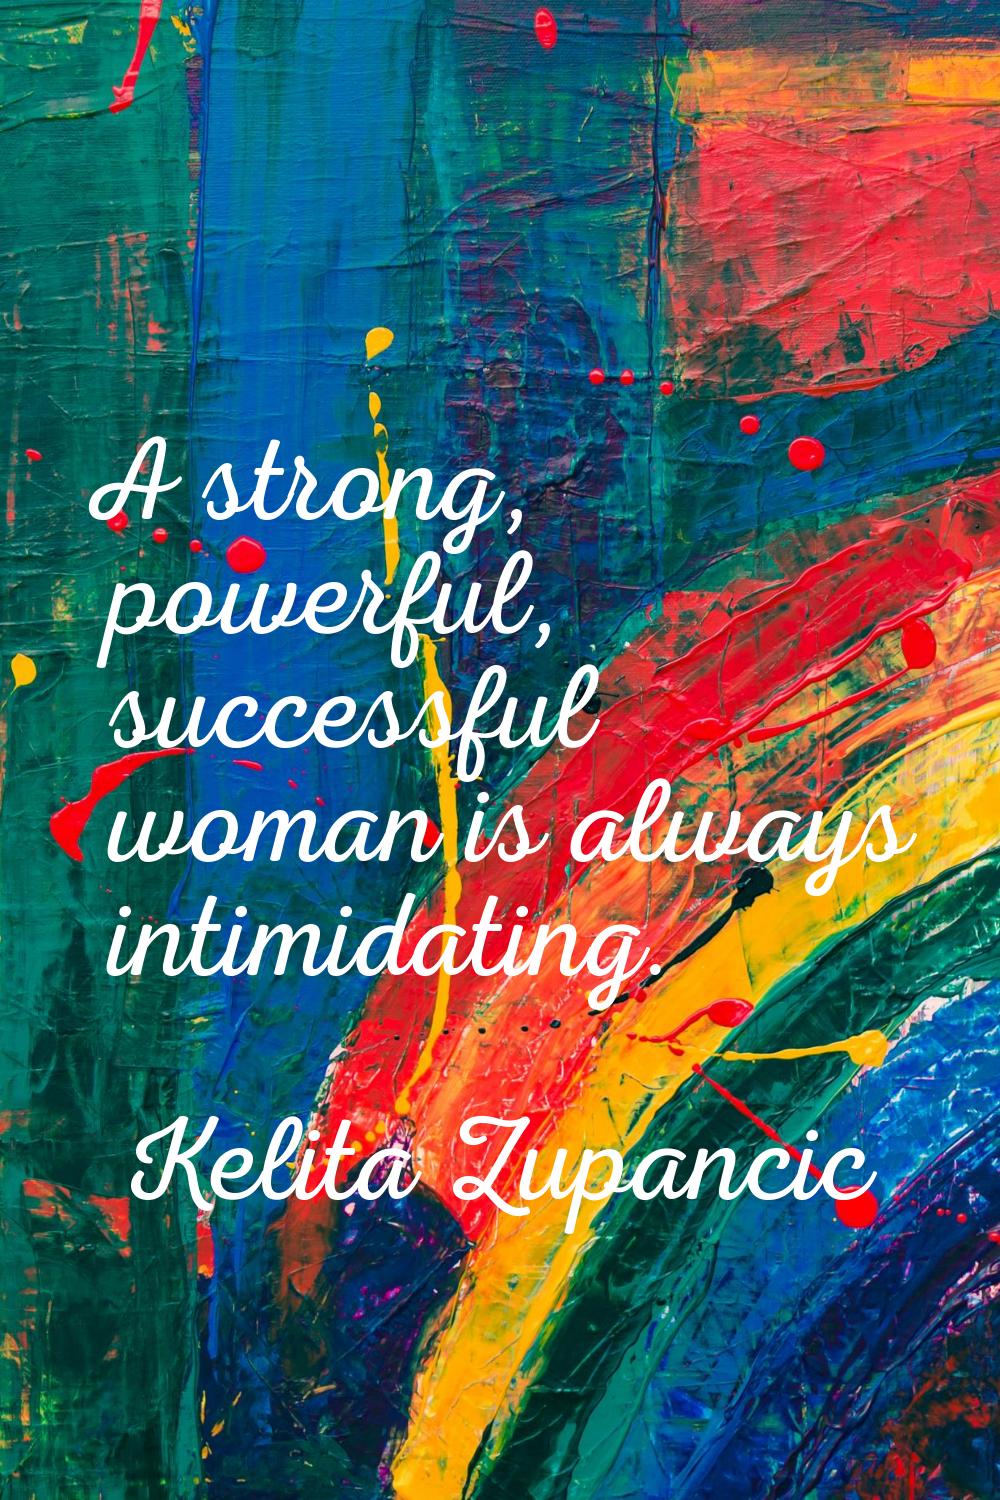 A strong, powerful, successful woman is always intimidating.